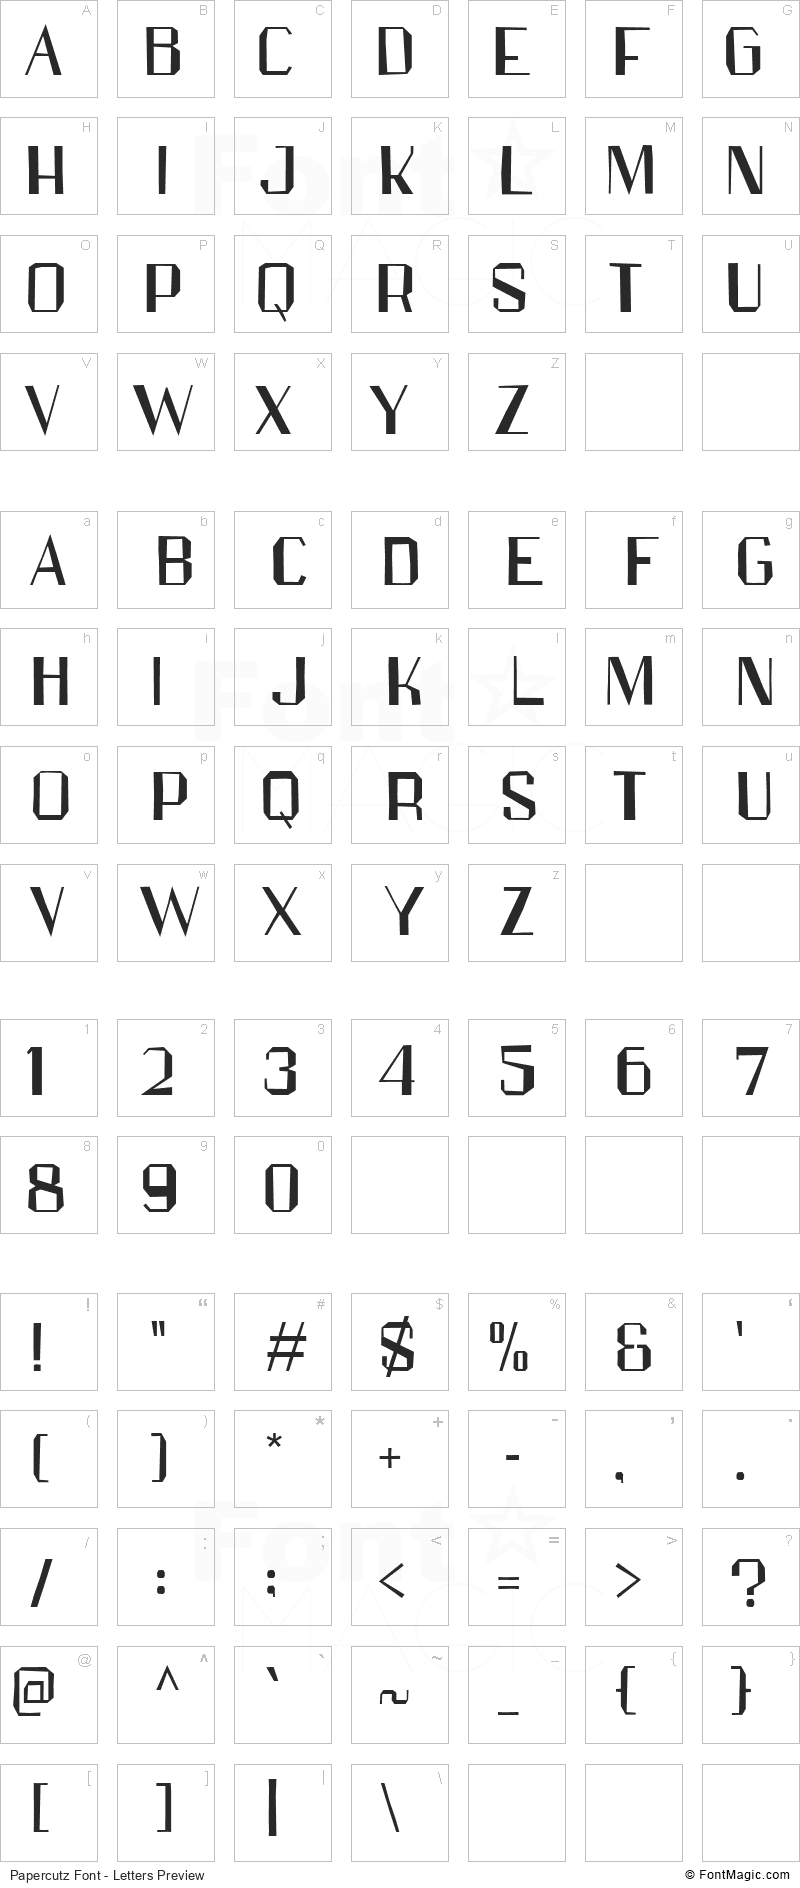 Papercutz Font - All Latters Preview Chart